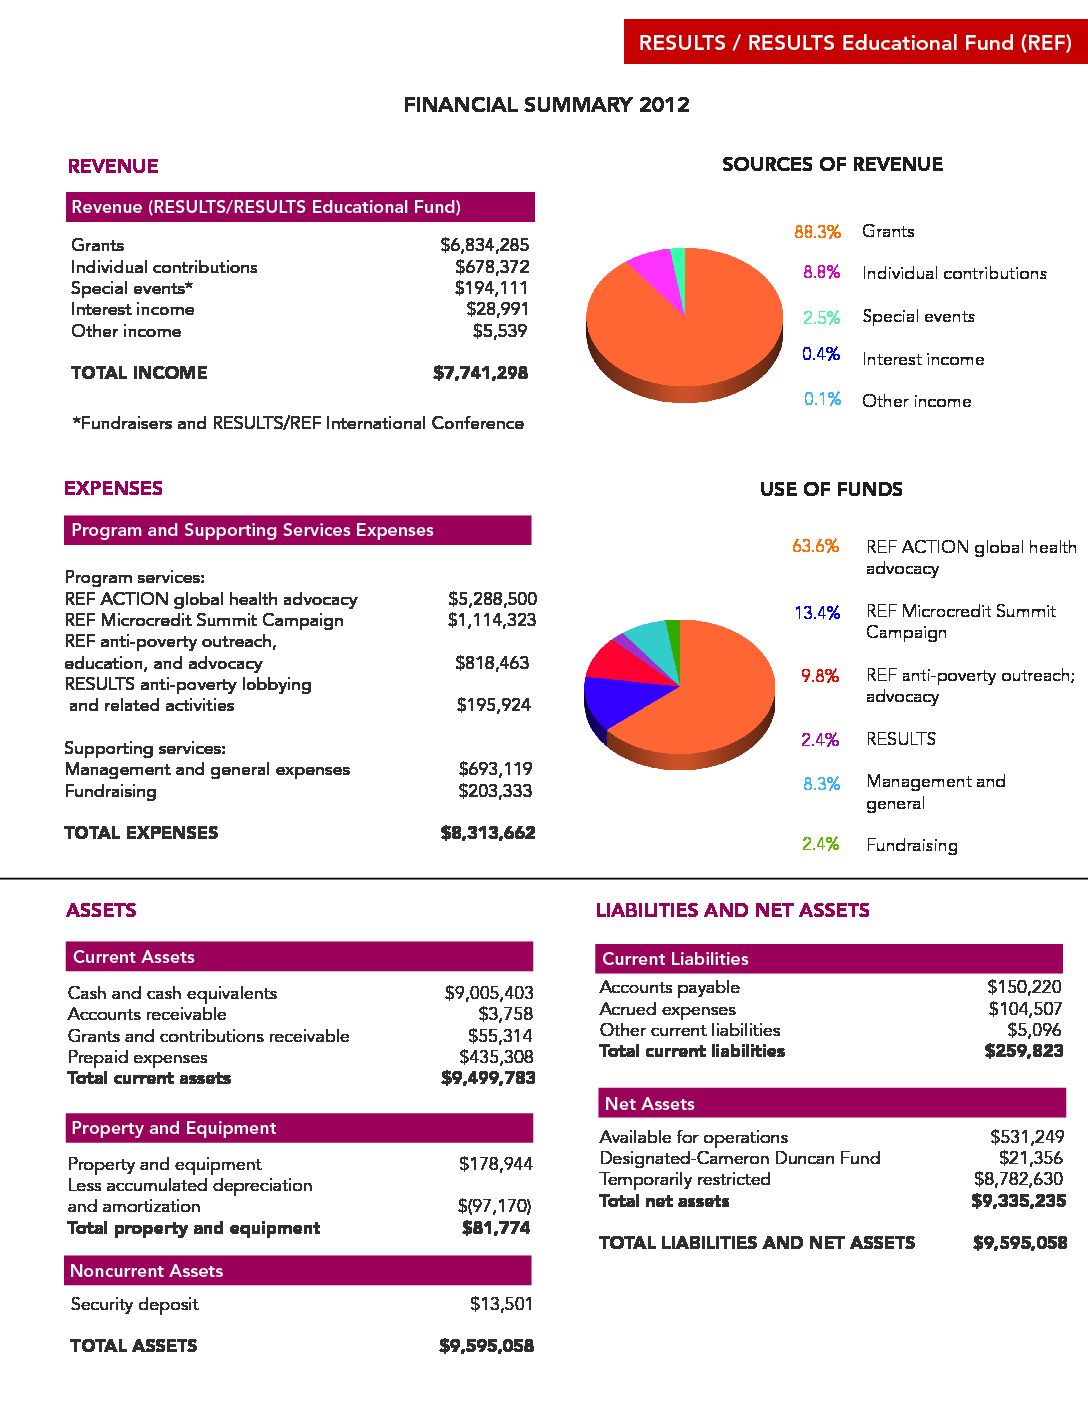 Financials & Annual Report - RESULTS